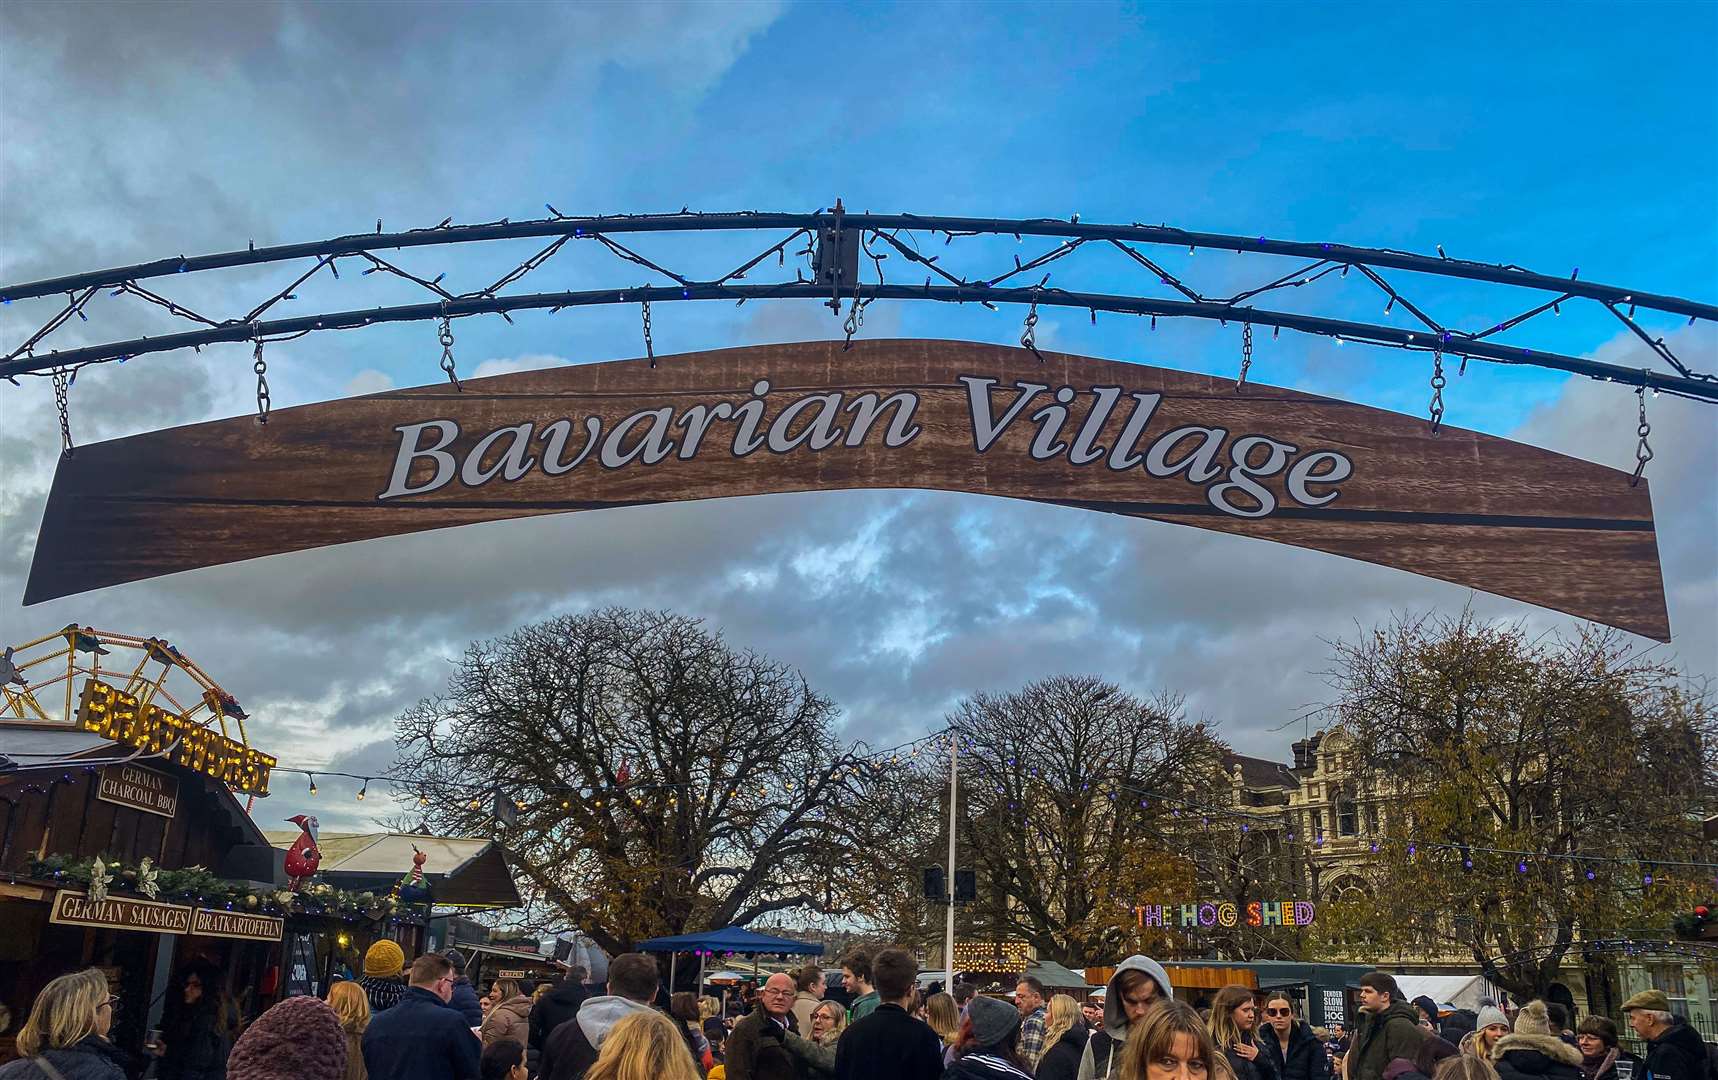 The pop-up Bavarian Village is the main food hub at the market